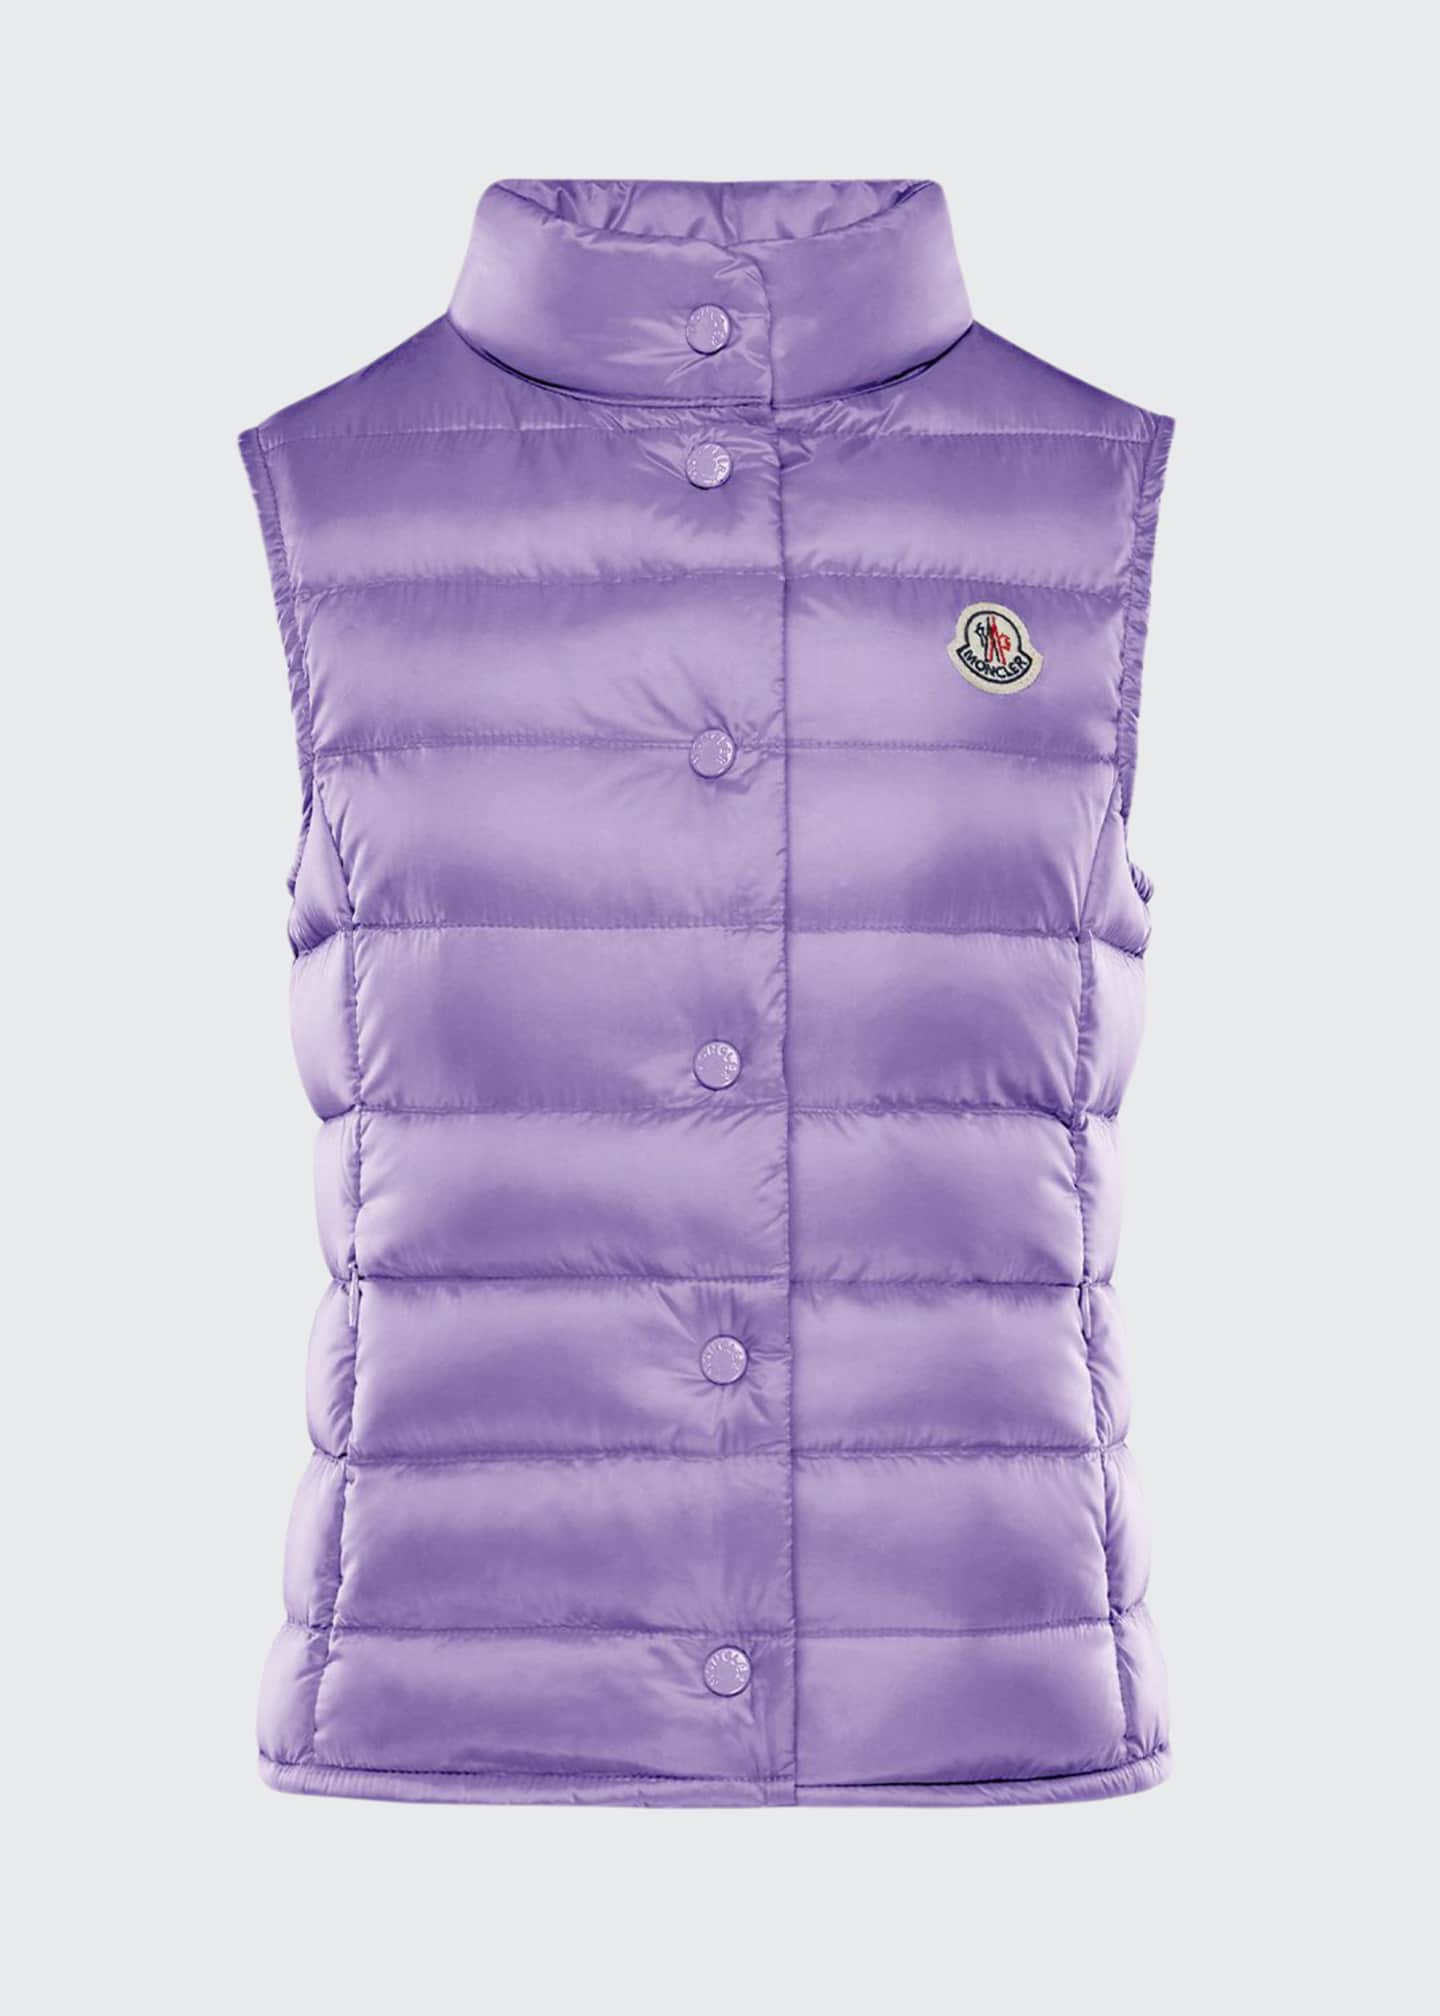 Moncler Girl's Liane Quilted Snap Front Vest, Size 4-6 - Bergdorf Goodman